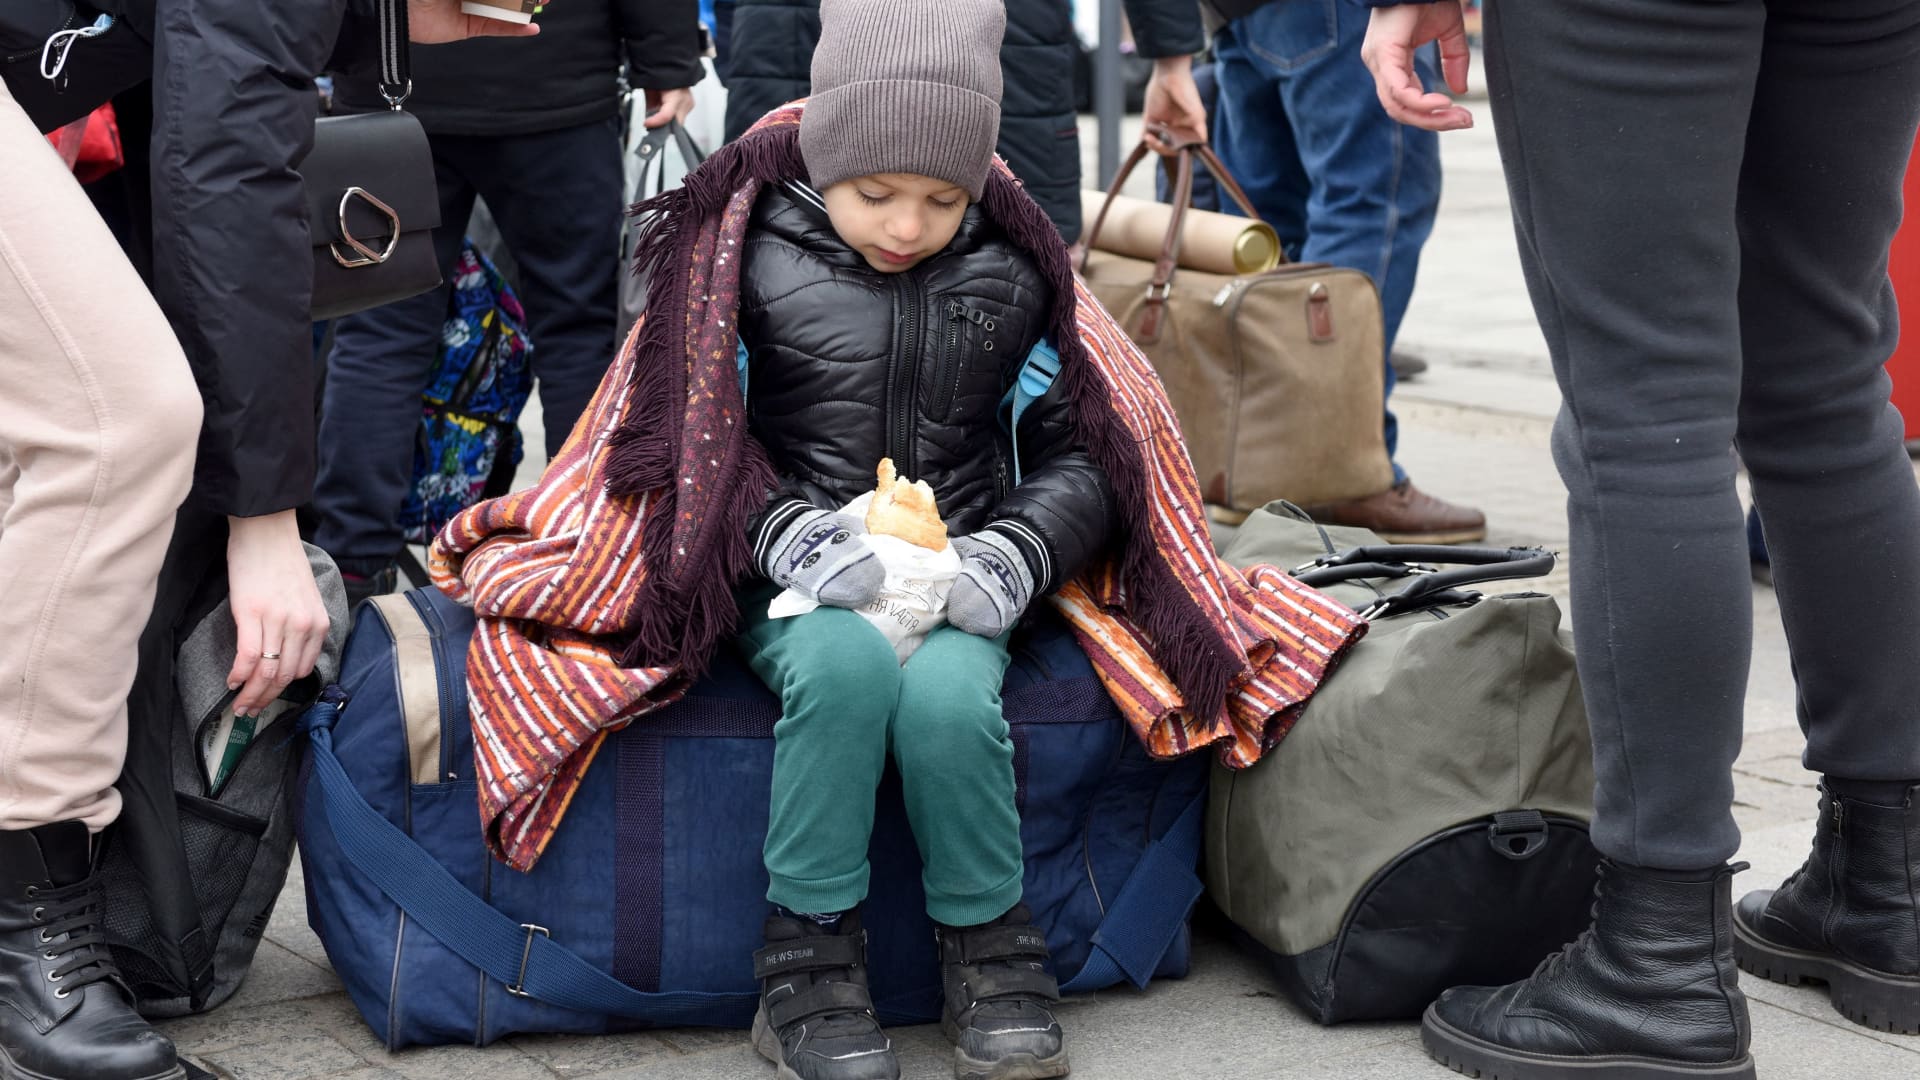 A child eats as people wait for a train to Poland at the railway station of the western Ukrainian city of Lviv on March 6, 2022, 11 days after Russia launched a military invasion on Ukraine.